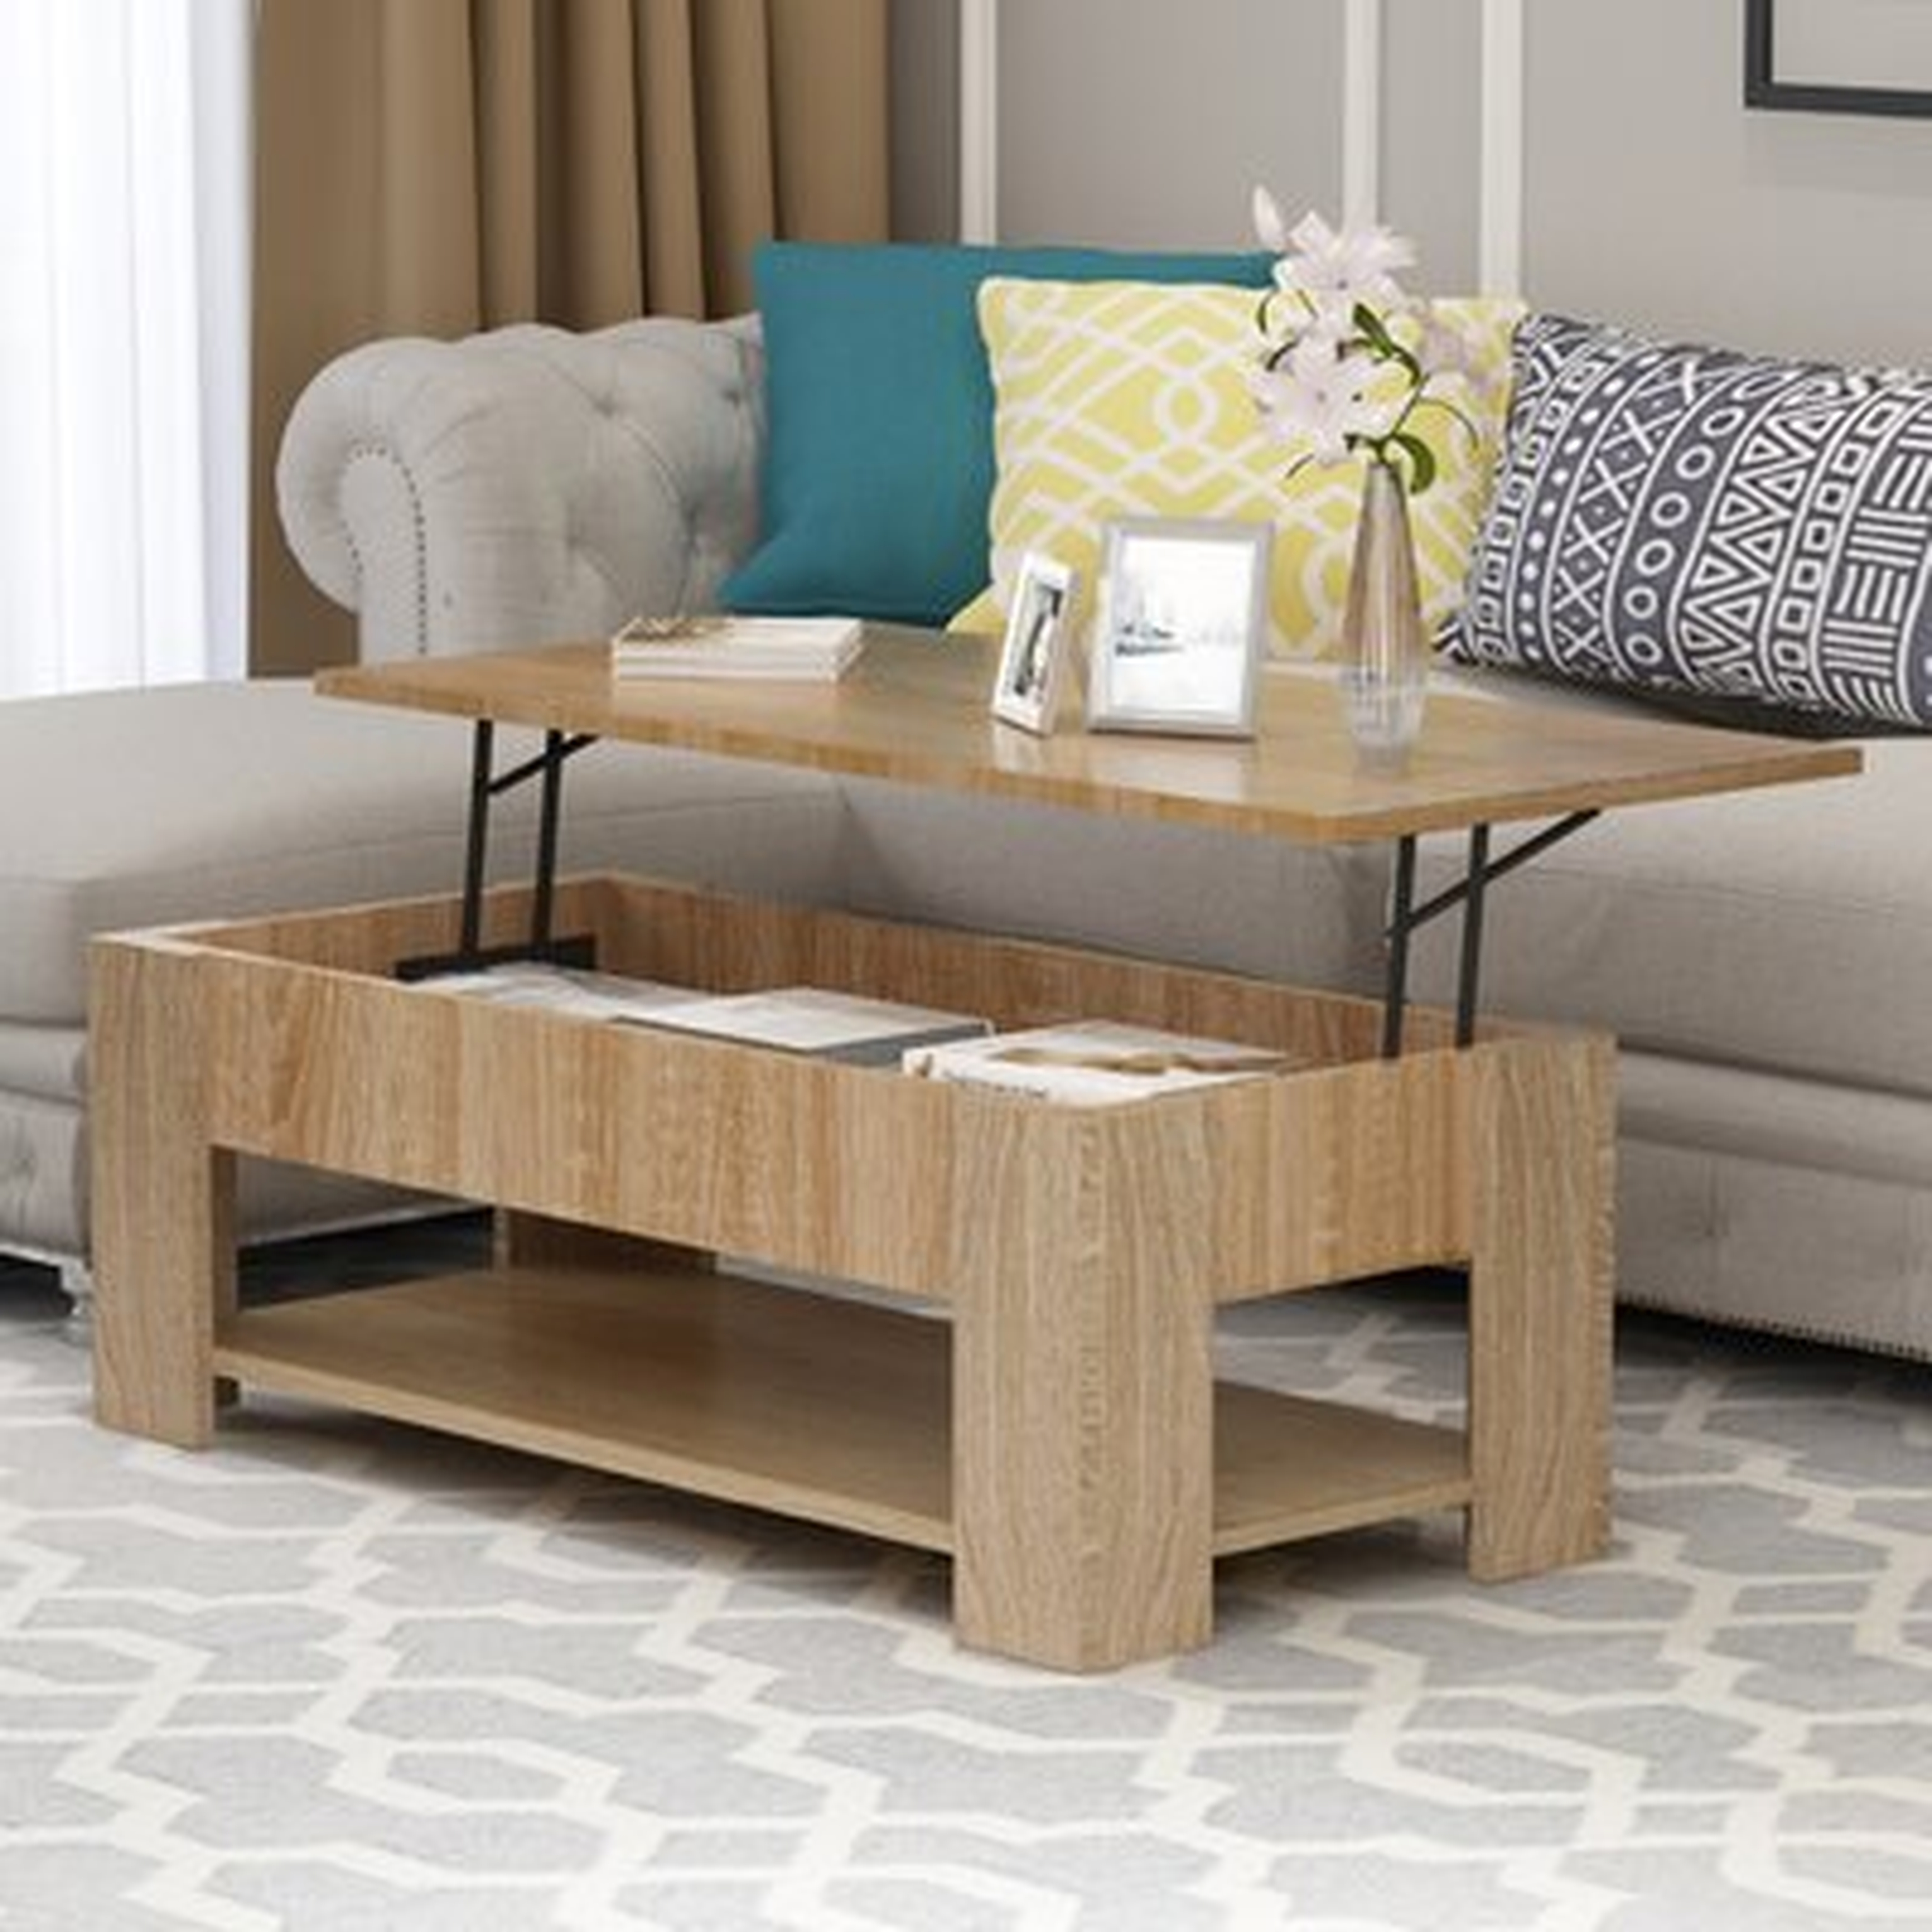 Lift-Top Coffee Table With Hidden Compartment Storage Shelf Living Room Furniture - Wayfair